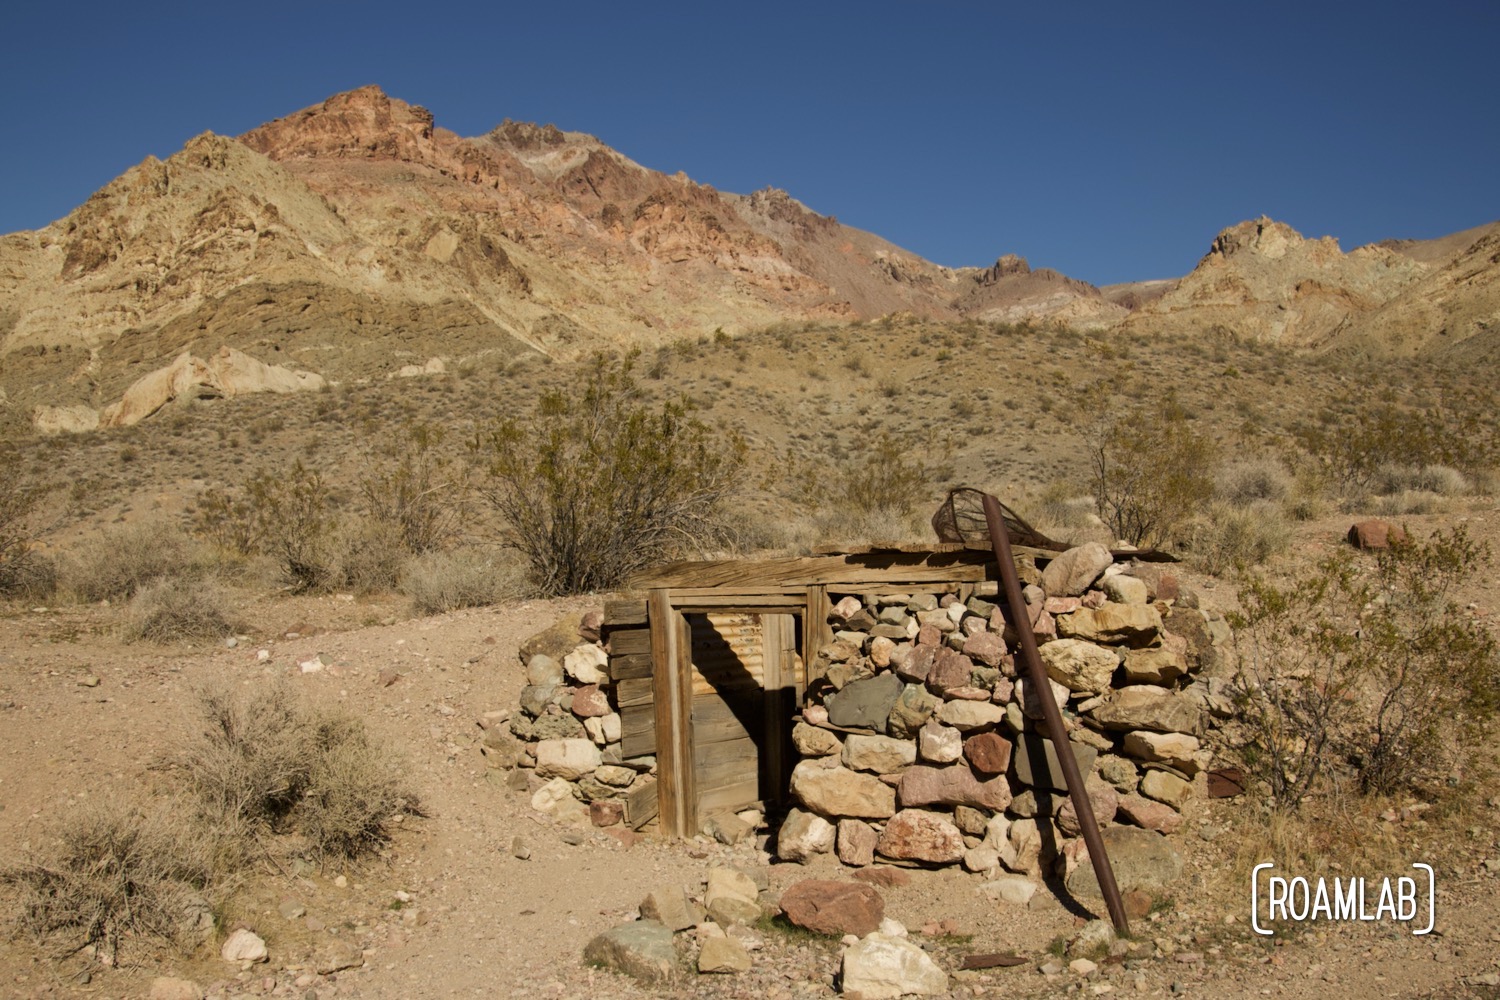 Ruins of a storage hut in Leadfield Ghost Town located along Titus Canyon Road in Death Valley National Park, California.